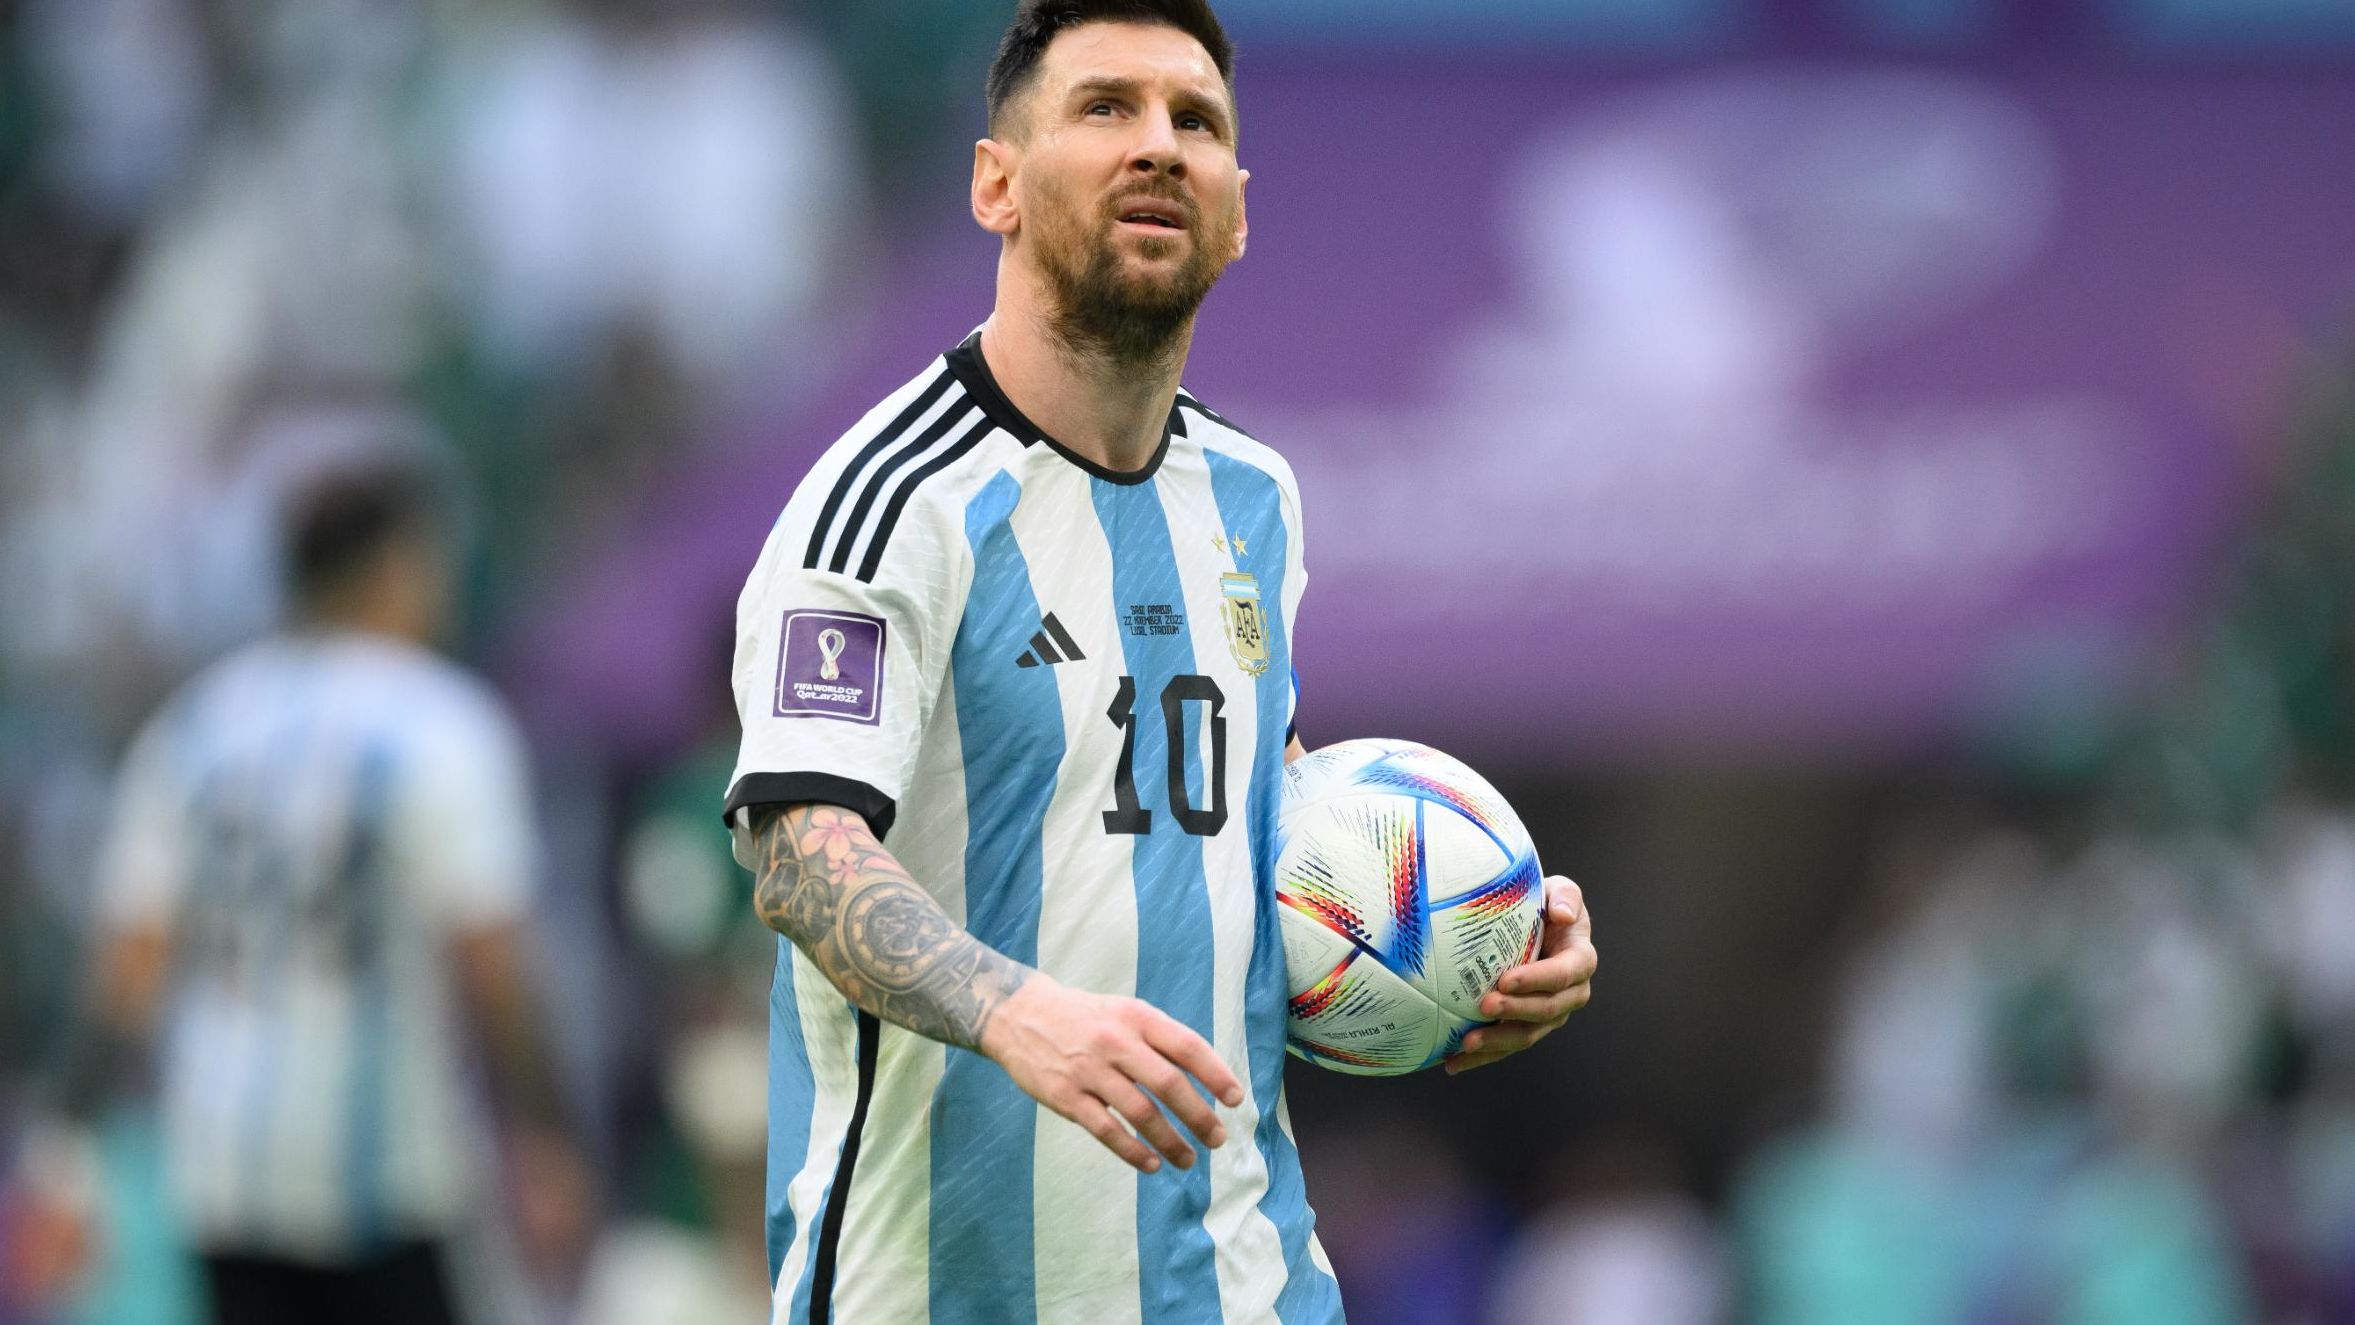 Lionel Messi scored the opener for Argentina and had a goal disallowed before Saudi Arabia mounted its comeback.